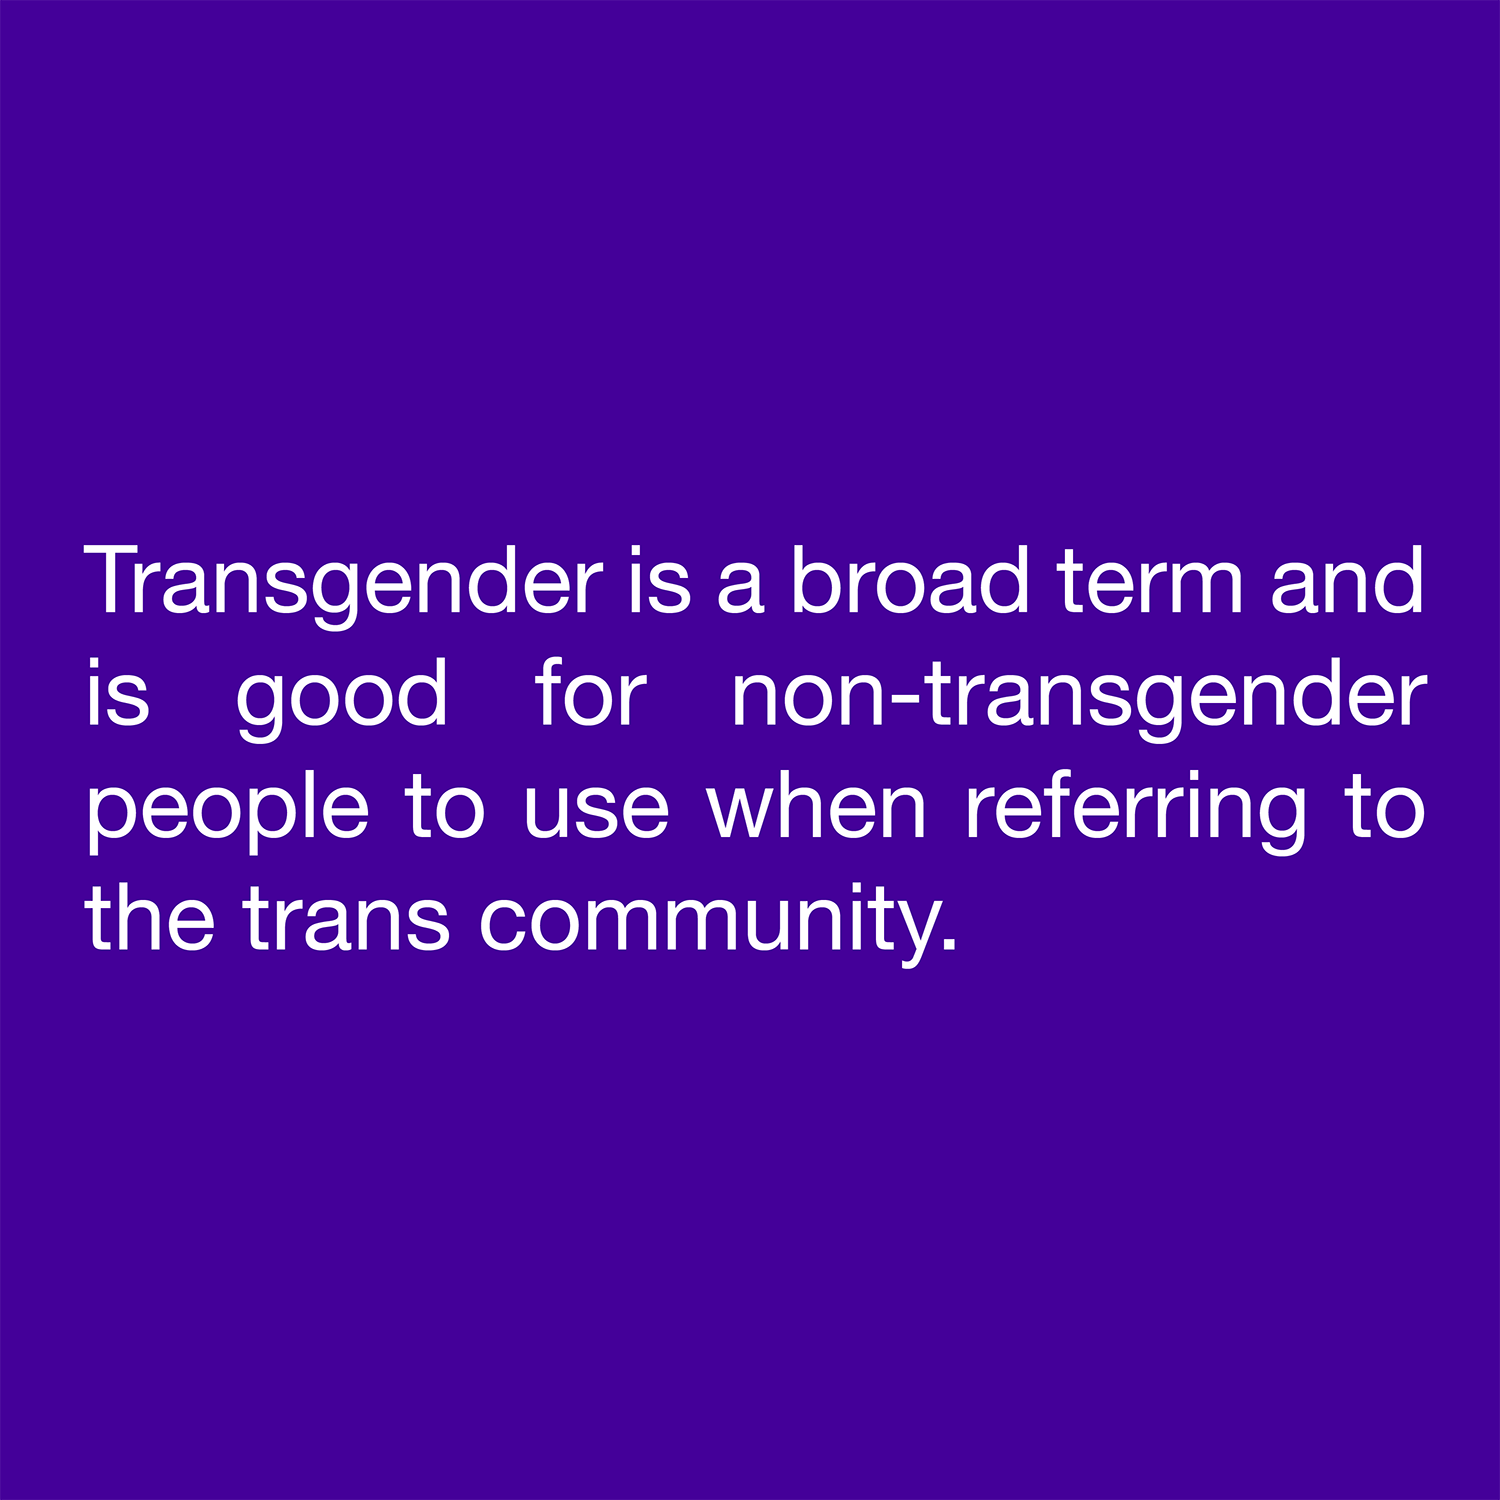  Transgender is a broad term and is good for non-transgender people to use when referring to the trans community. 